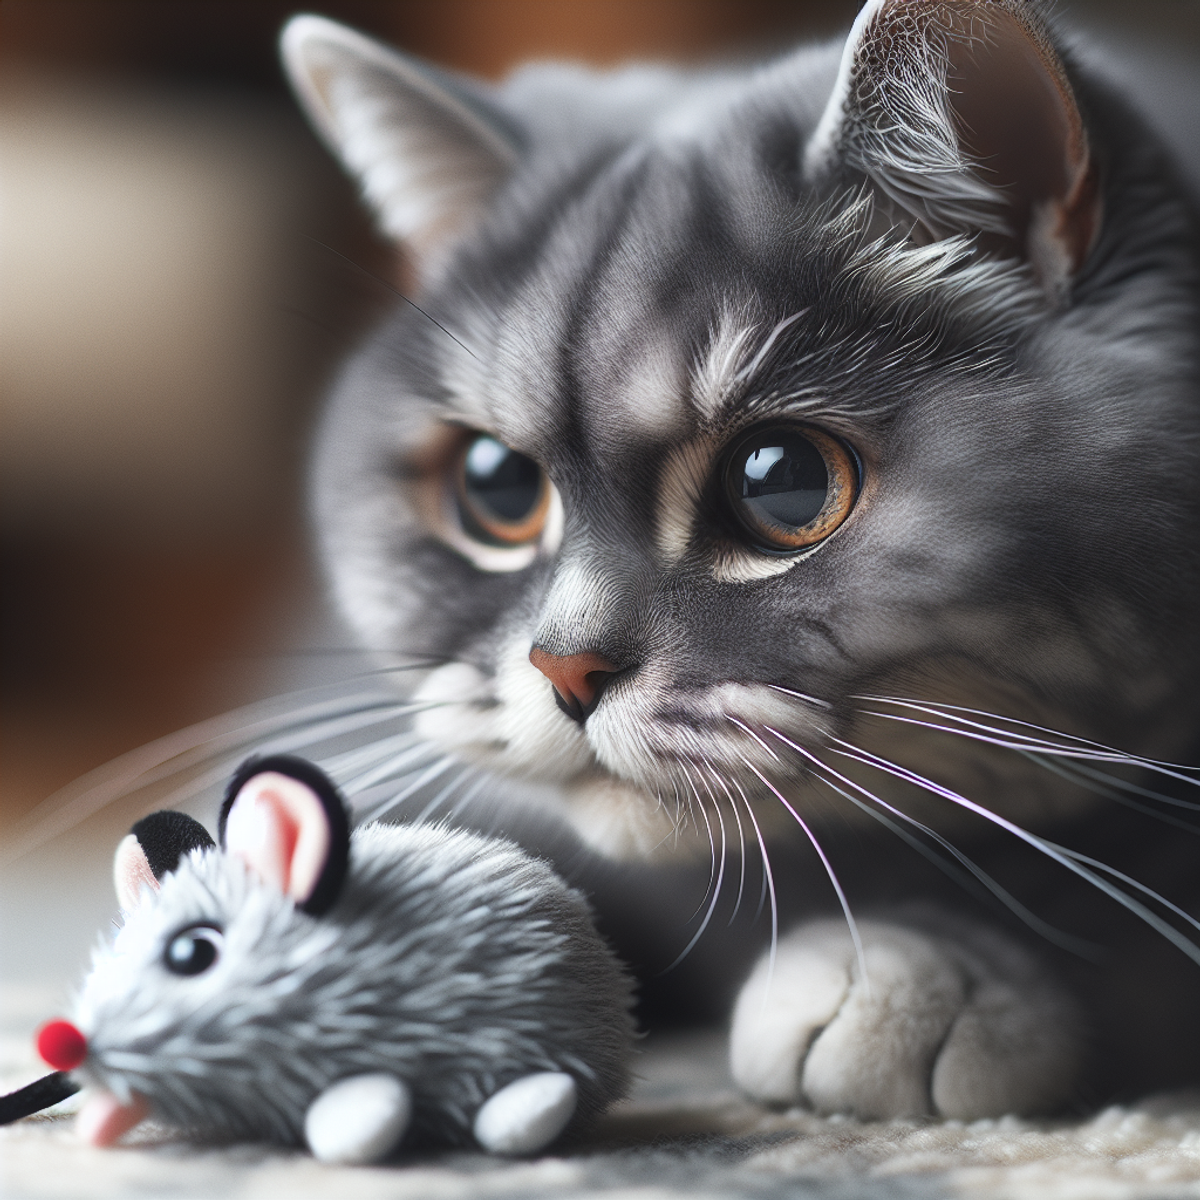 A close-up image of a senior gray cat playing with a mouse-shaped plush toy, showing enthusiasm and focused eyes.